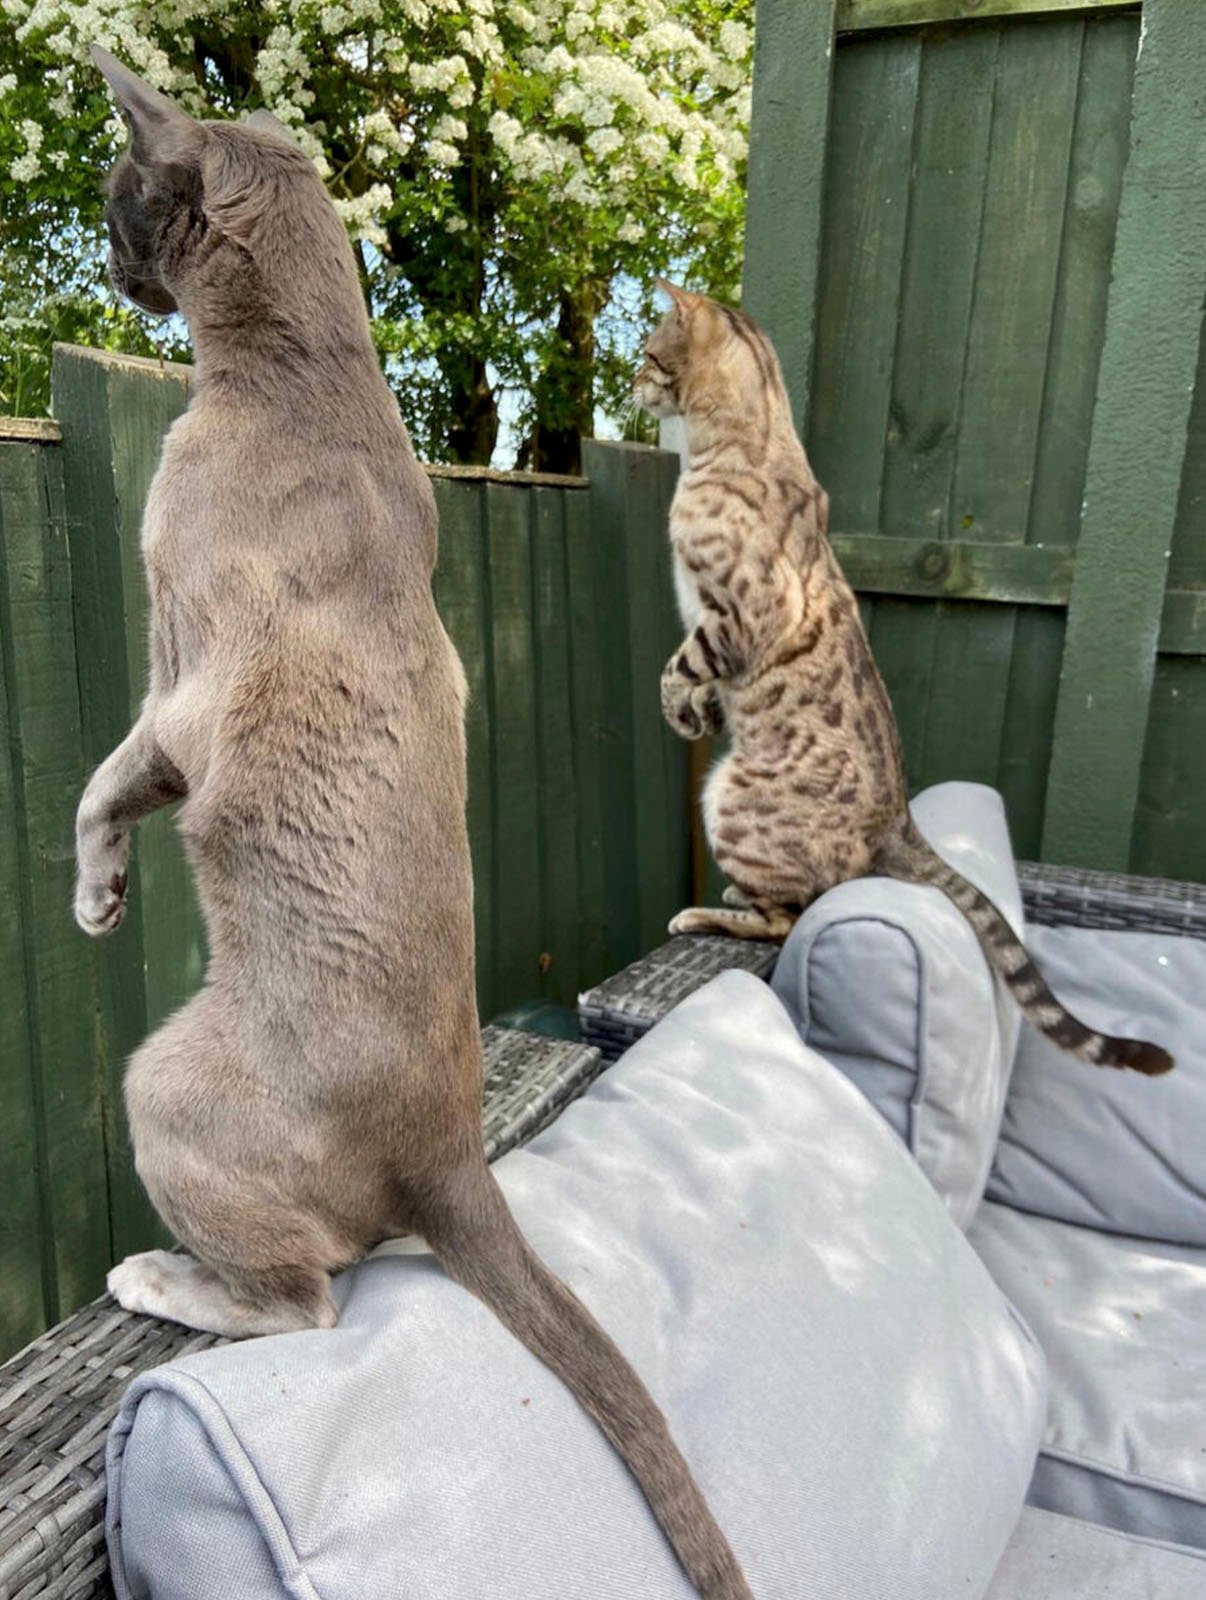 Two cats standing upright on their hind legs on a cushioned surface, looking over a green fence. One is a sleek gray and the other is a brown tabby, both appearing curious or attentive.